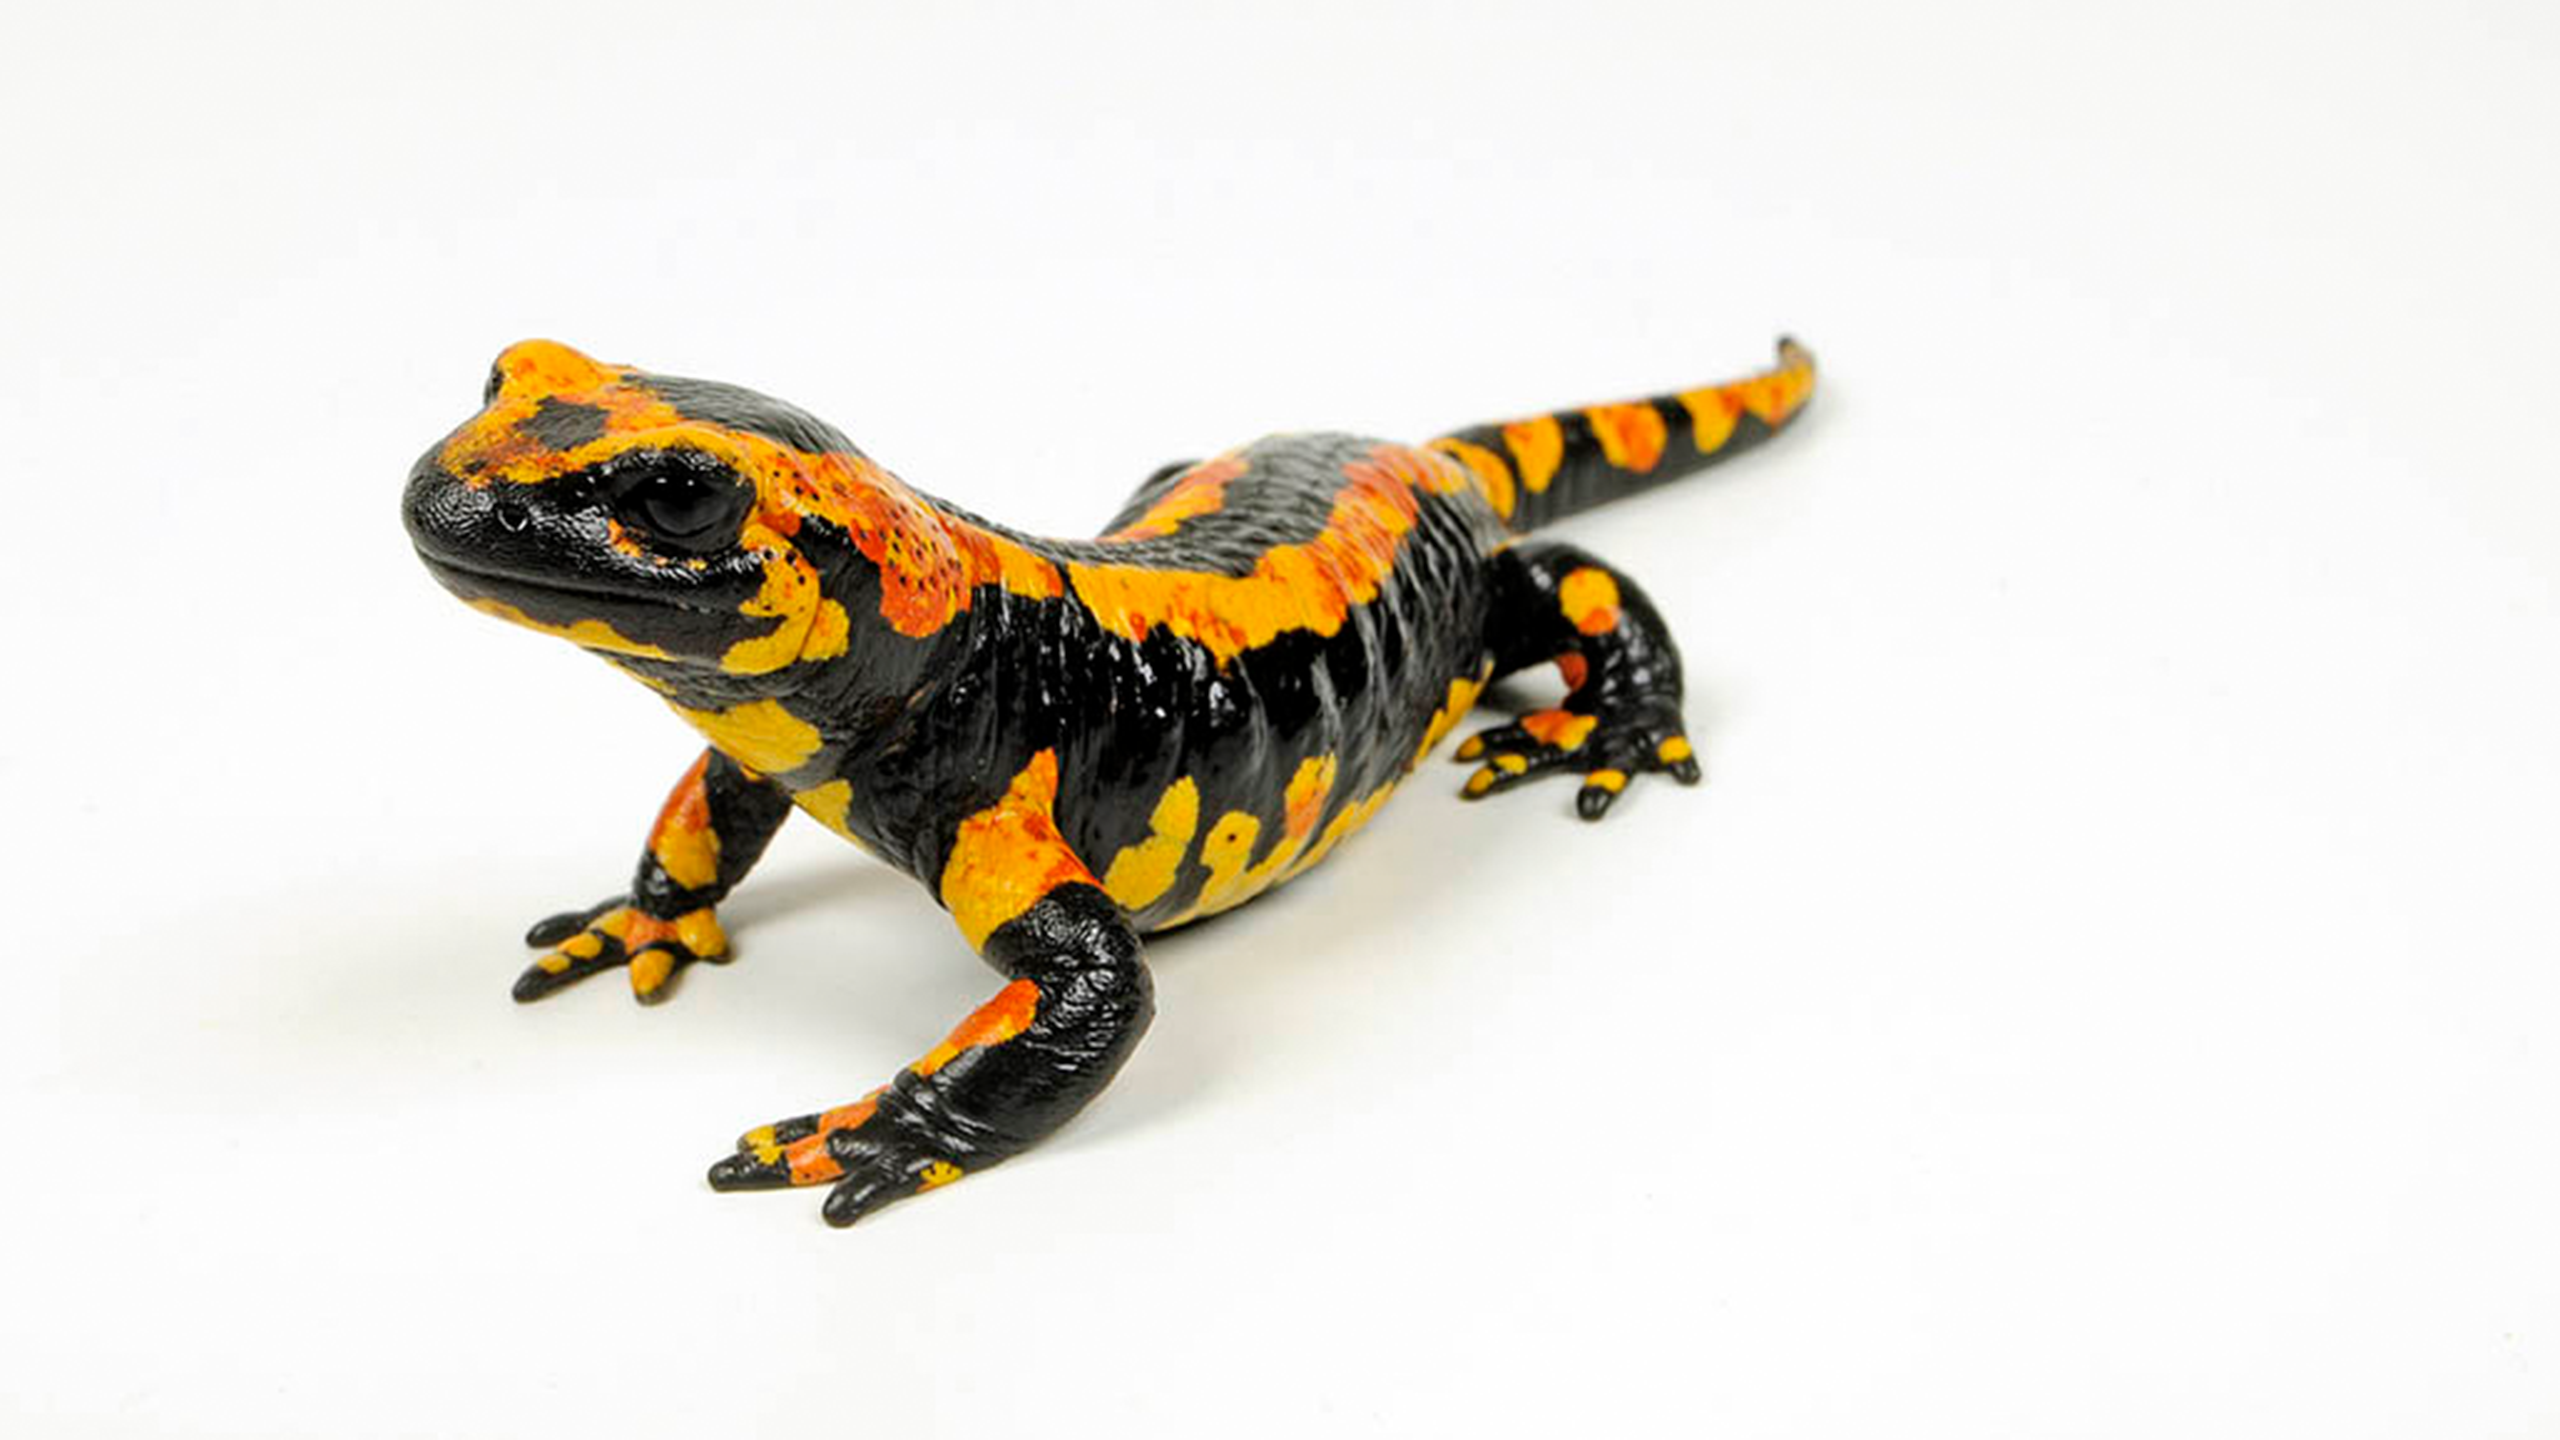 A tricolored fire salamander (Salamandra s. terrestris) from Solling | Benny Trapp 